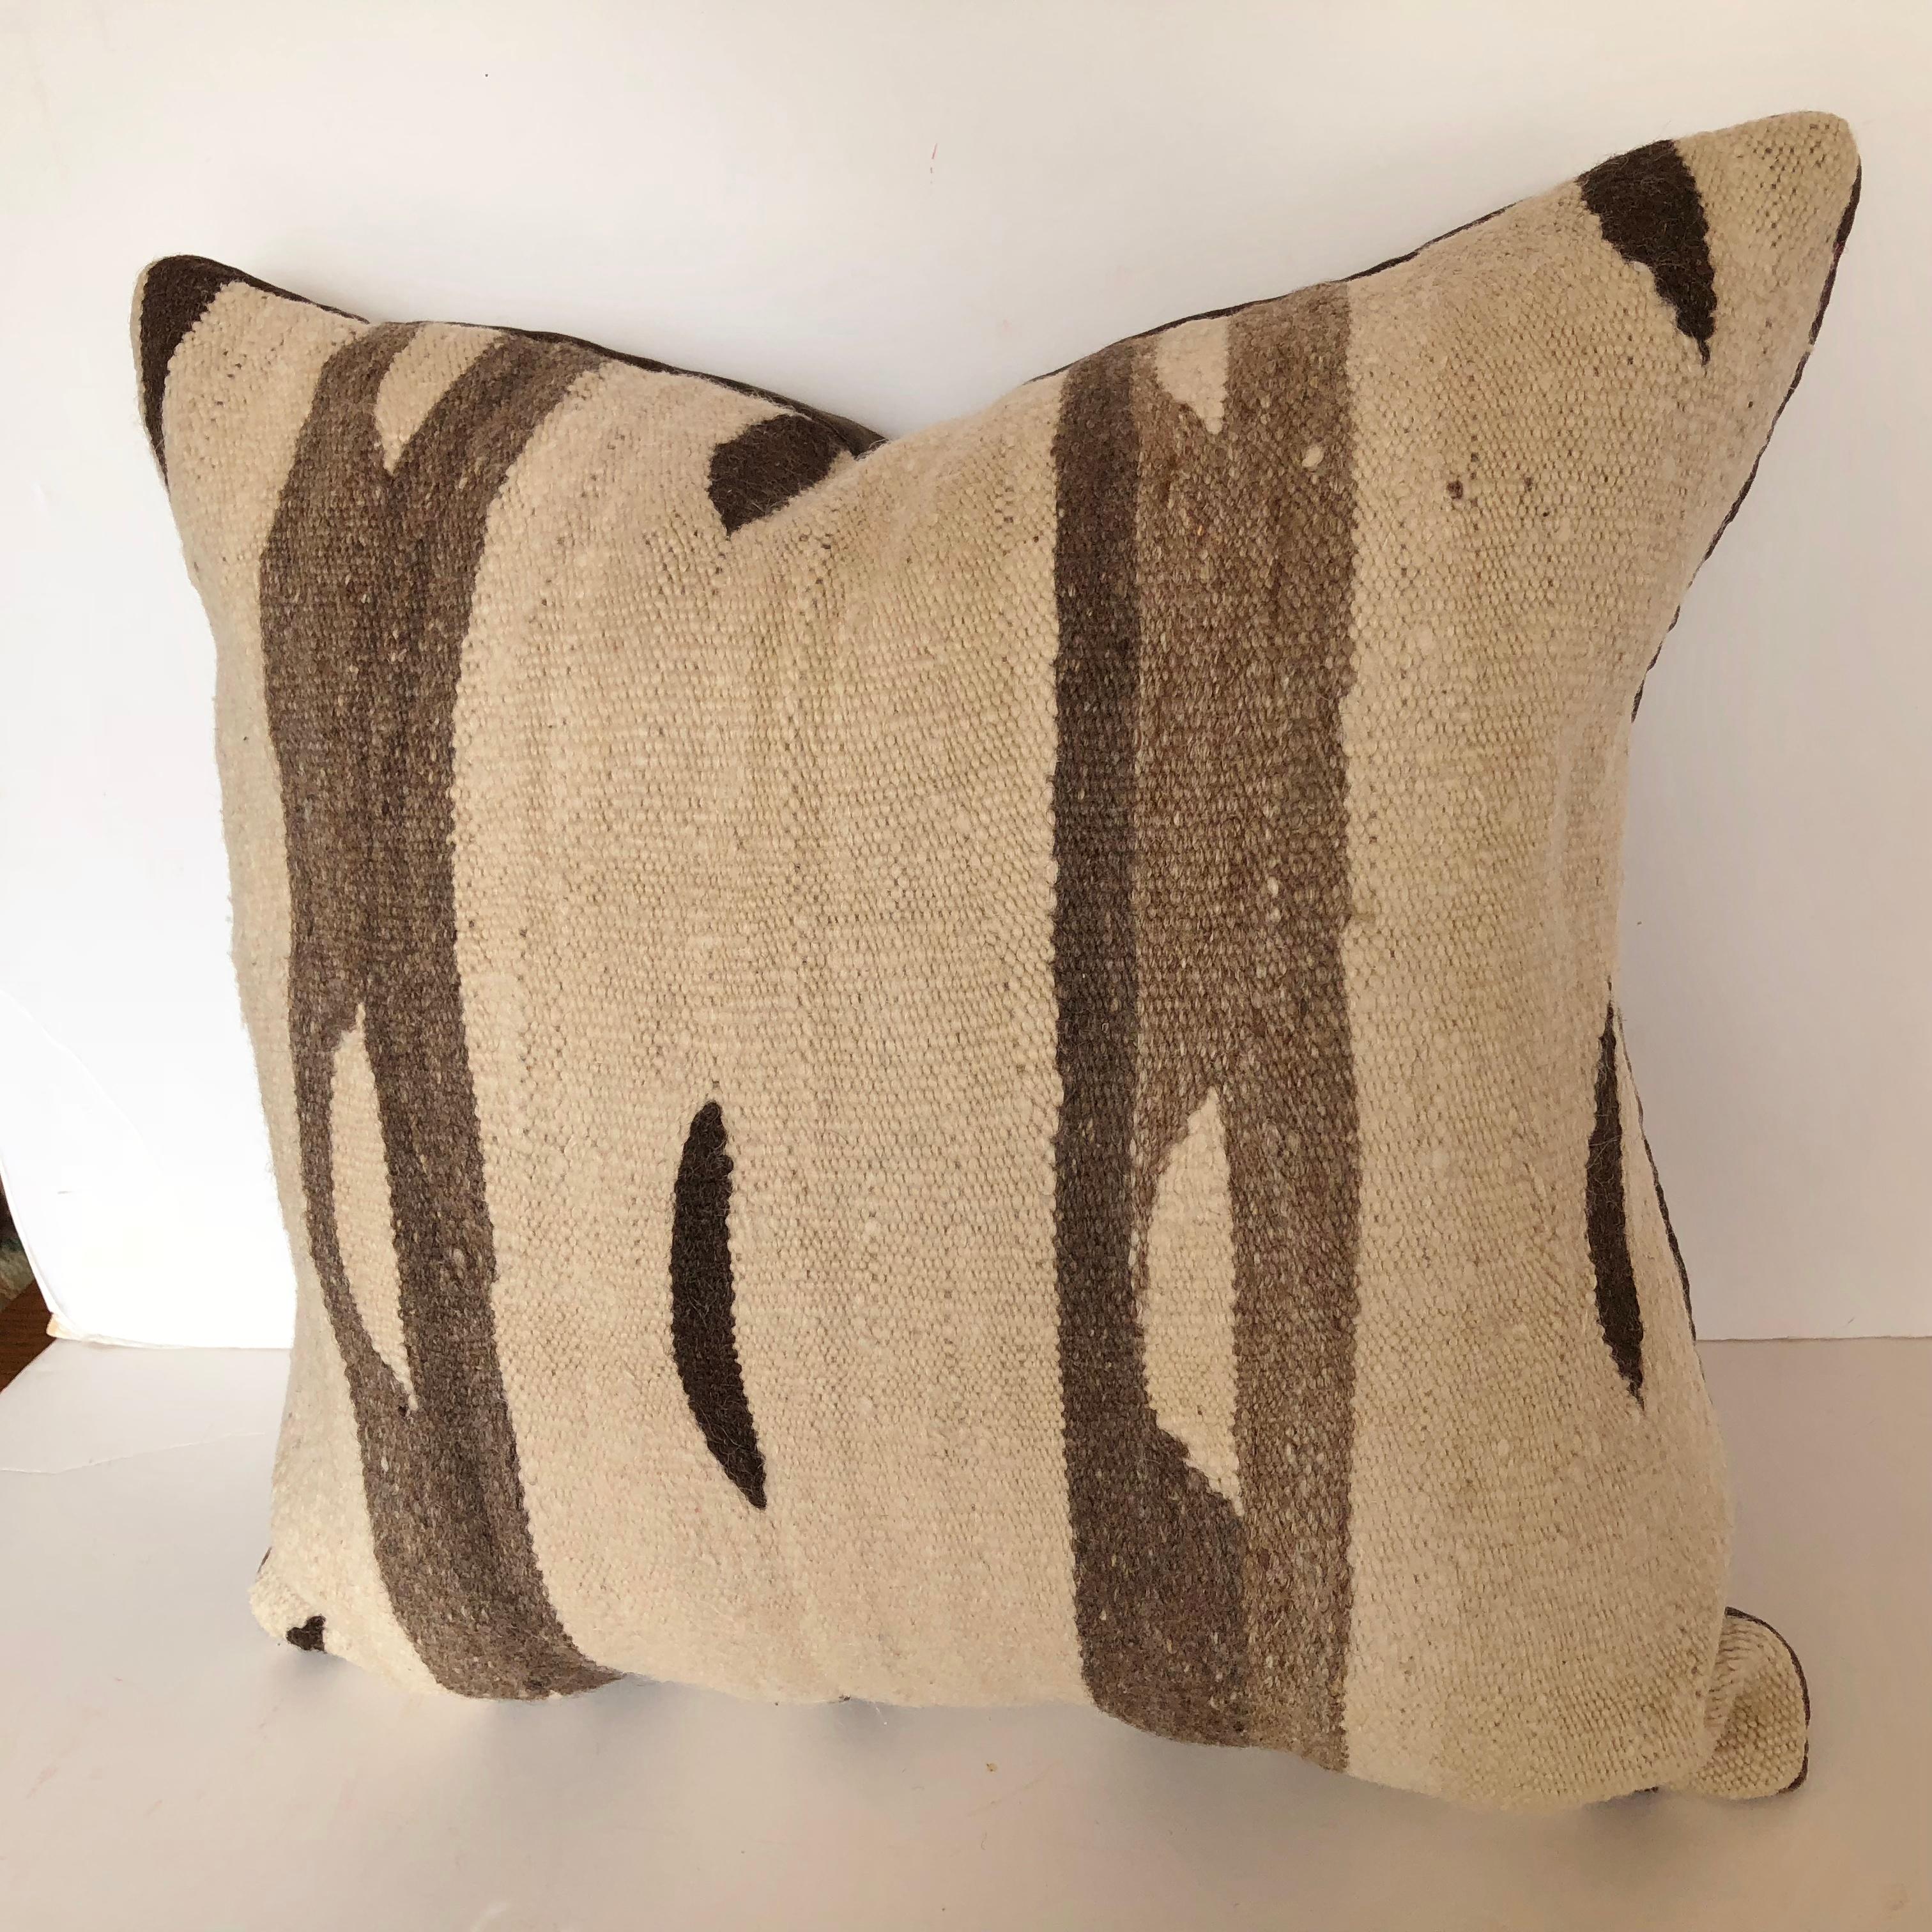 Custom pillow cut from a vintage hand loomed wool Moroccan rug made by the Berber tribes in the Ourika Valley of the Upper Atlas Mountains. The wool is soft and lustrous with all natural color. The pillow is backed in velvet, filled with an insert